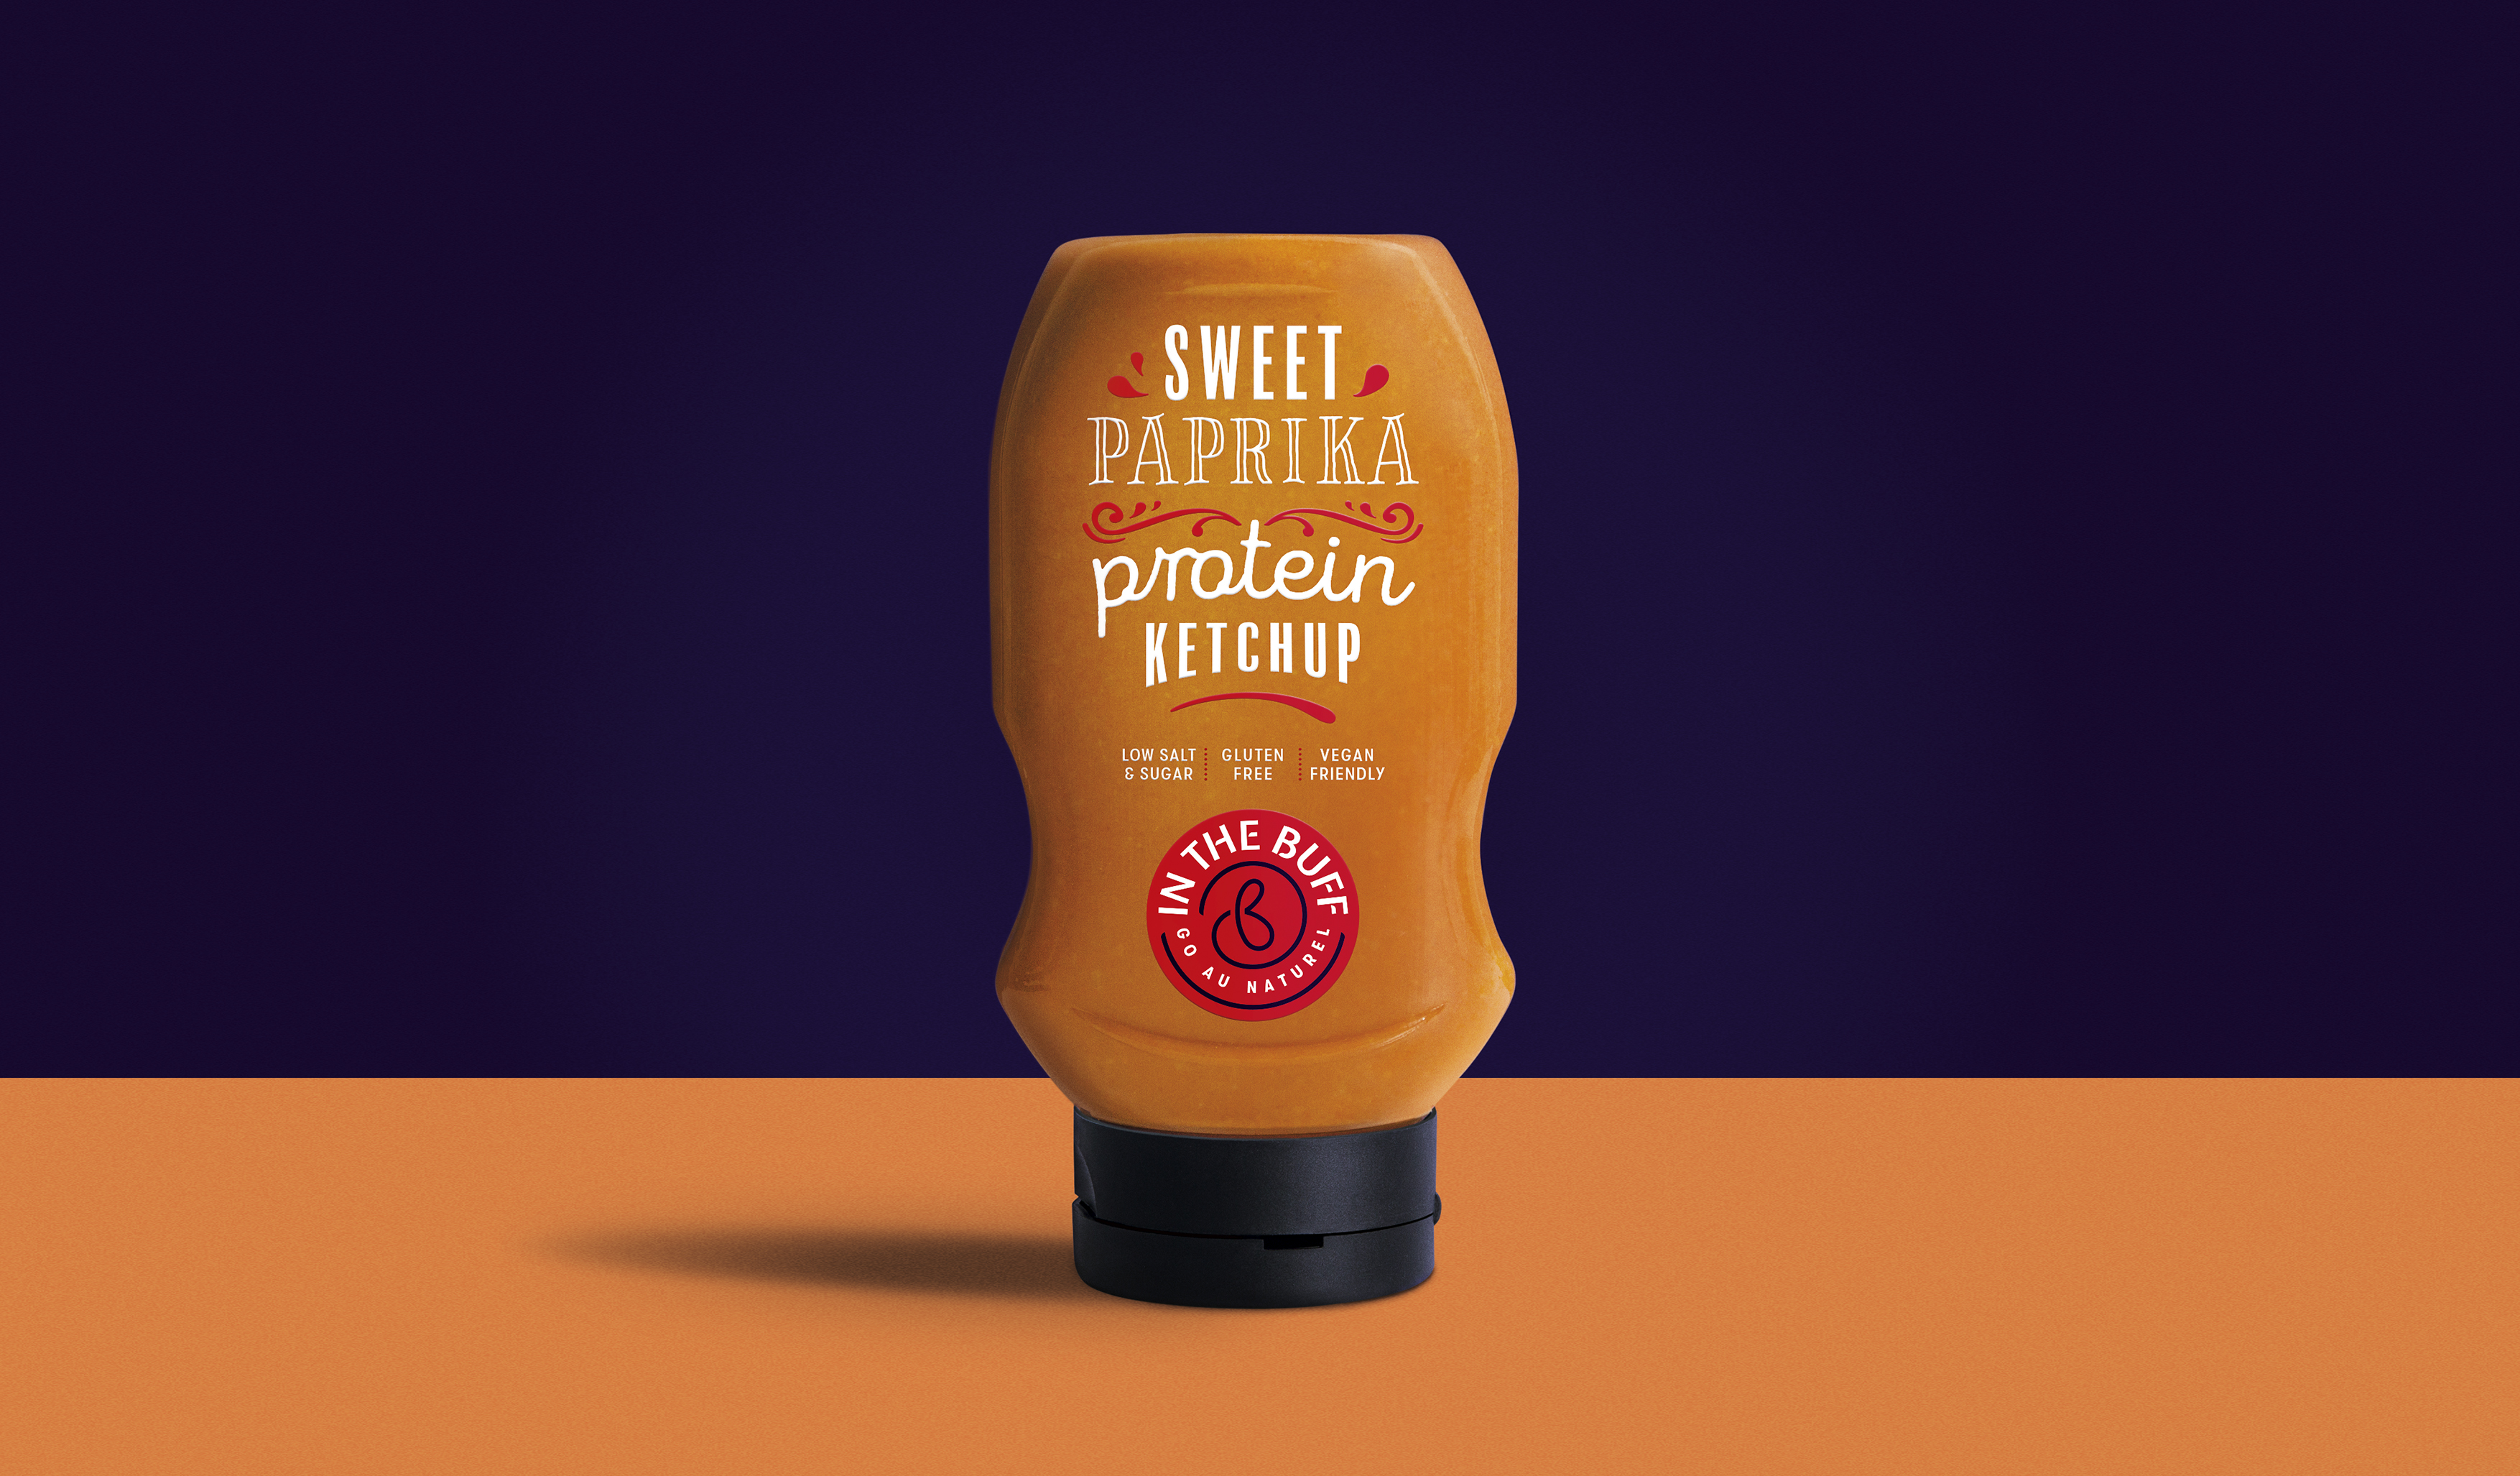 Creative Agency Southpaw Helps to Launch Hennick's Protein-Packed Ketchup 'In The Buff'